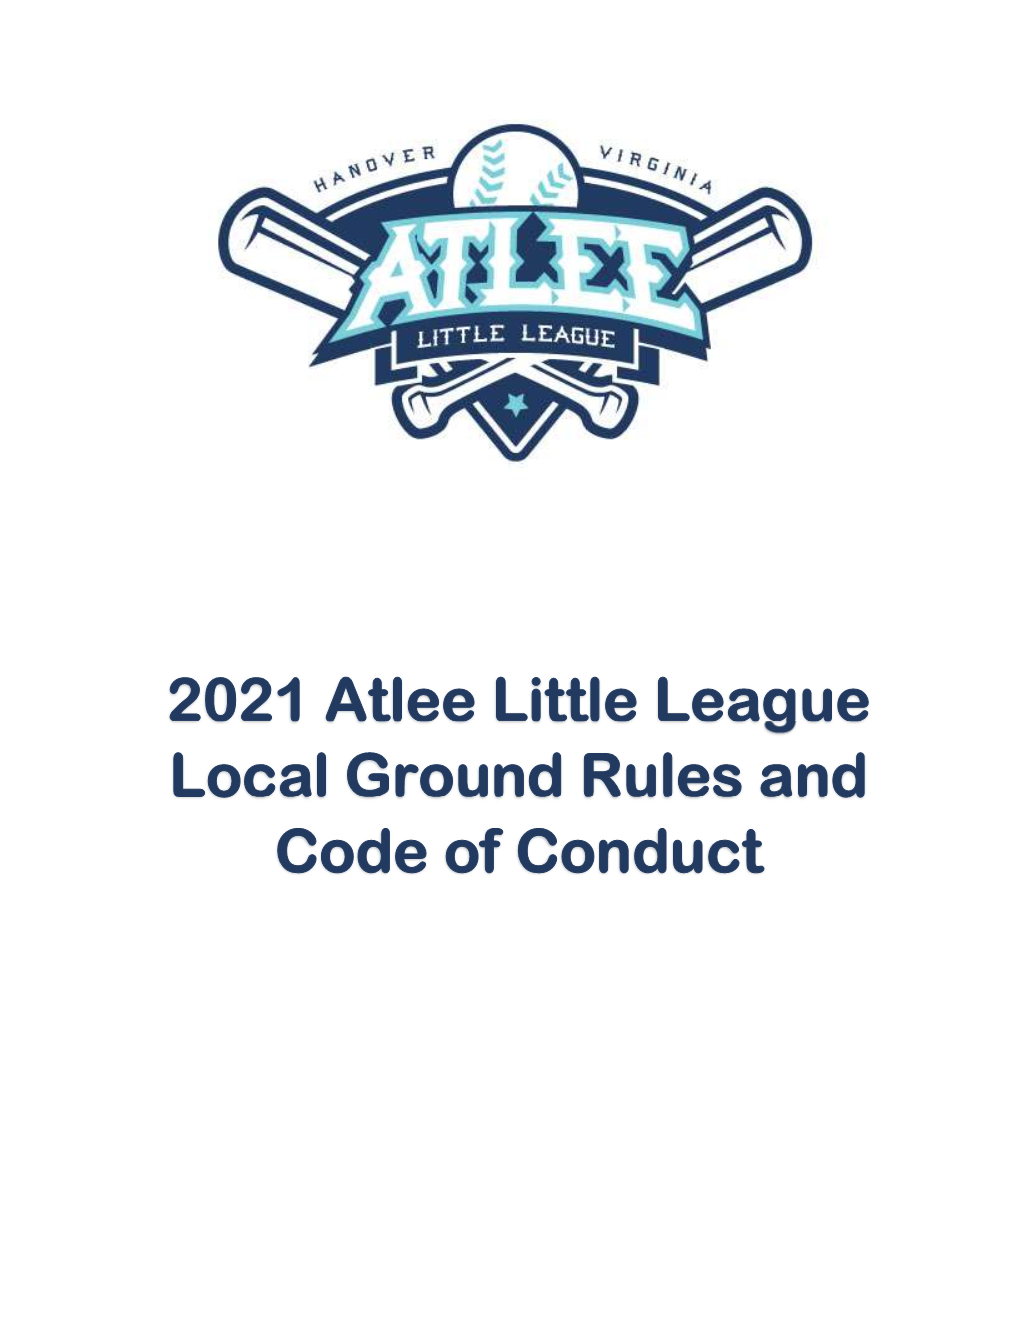 2021 Atlee Little League Local Ground Rules and Code of Conduct